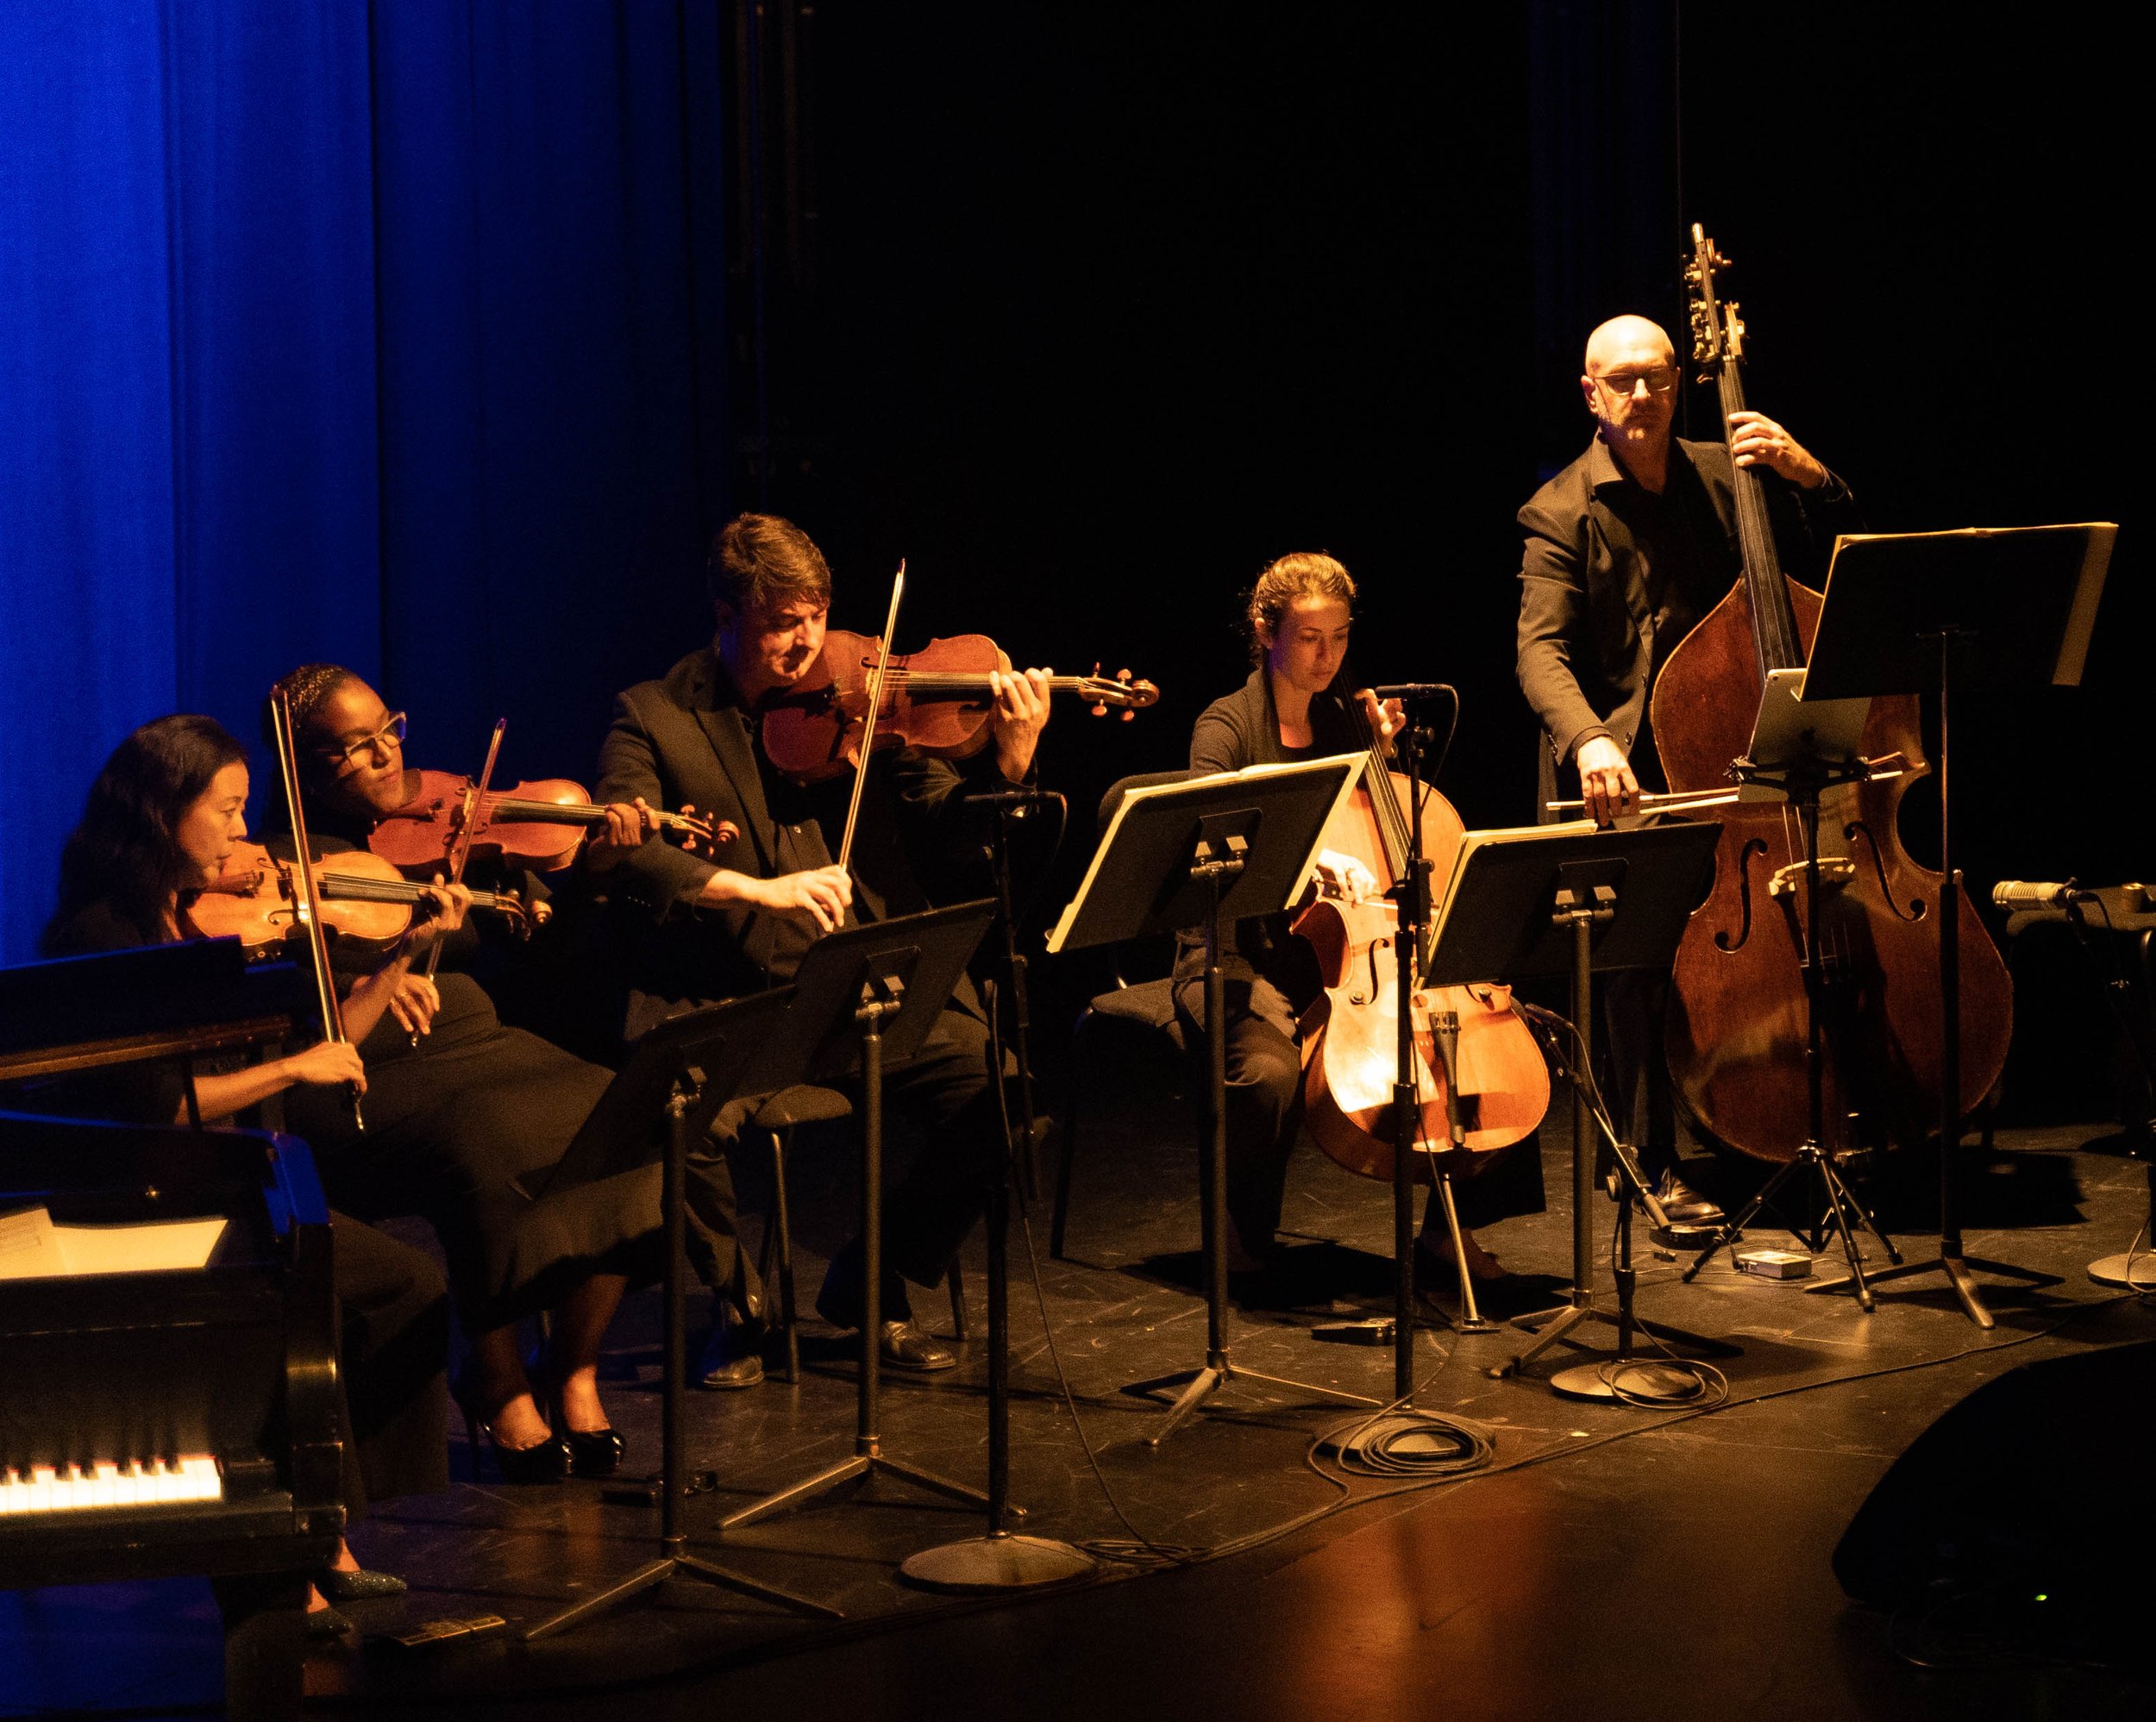  Alyssa Park, Jessica Guideri, Andrew Duckles, Hillary Smith, and Mike Valerio finish performing on Tuesday, April 26, at The Broad Stage in Santa Monica, Calif. (Karén Vartanian | The Corsair)  